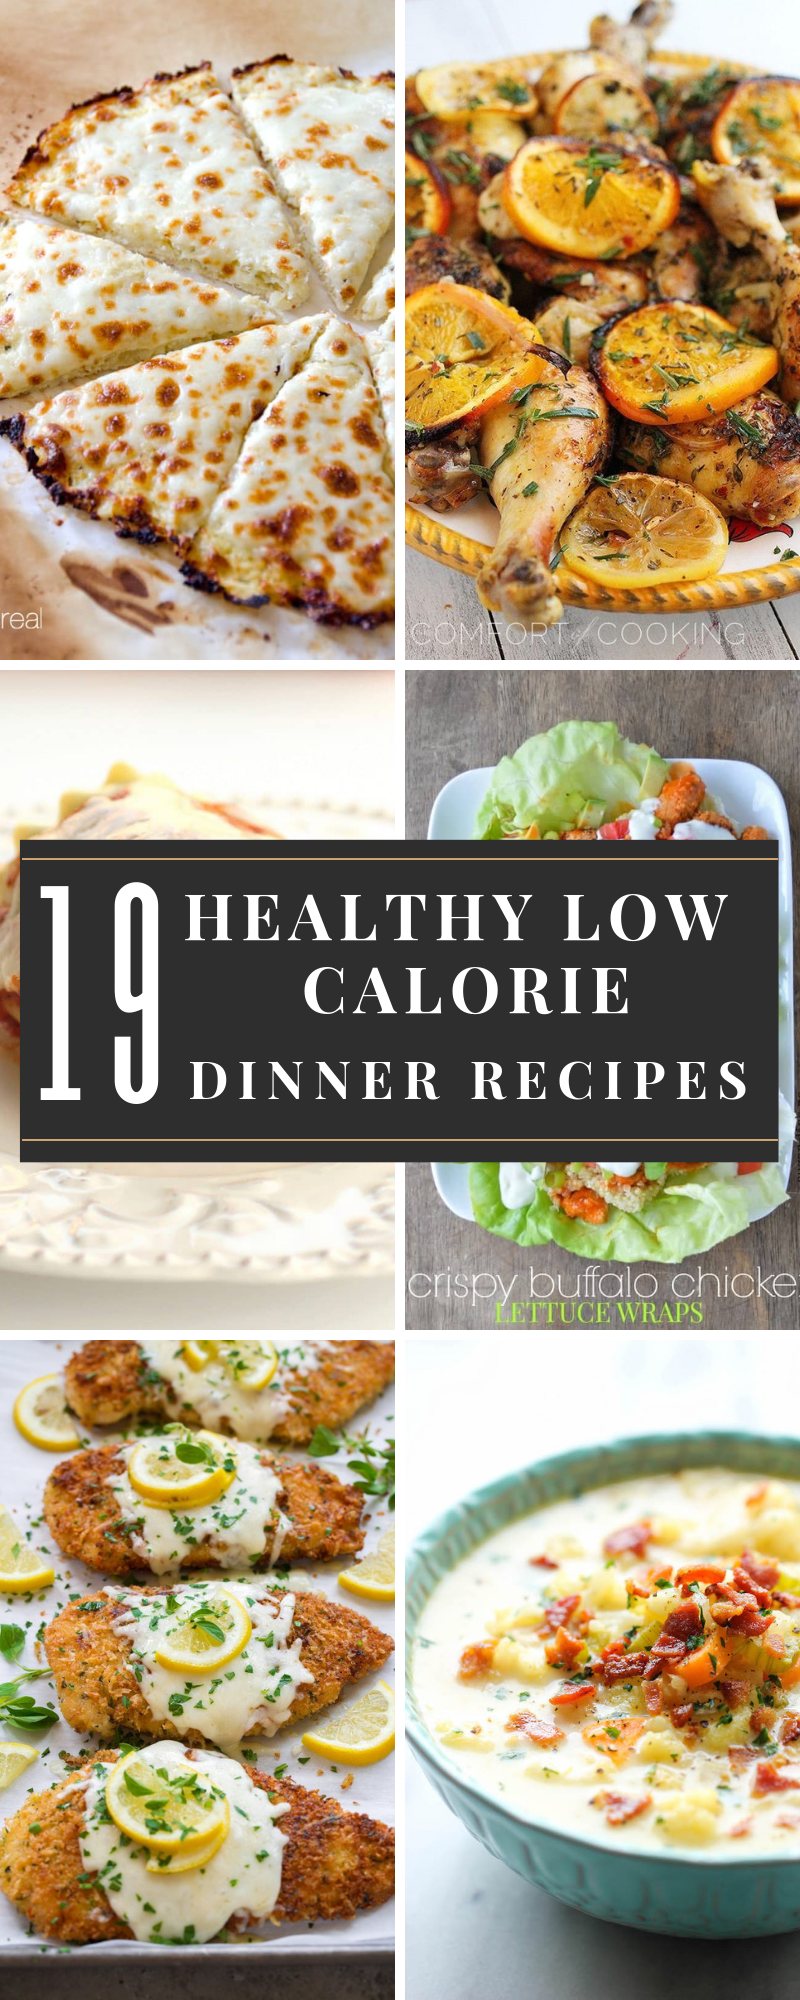 19 Healthy Low Calorie Weight Loss Dinner Recipes! -   17 healthy recipes For Weight Loss turkey ideas